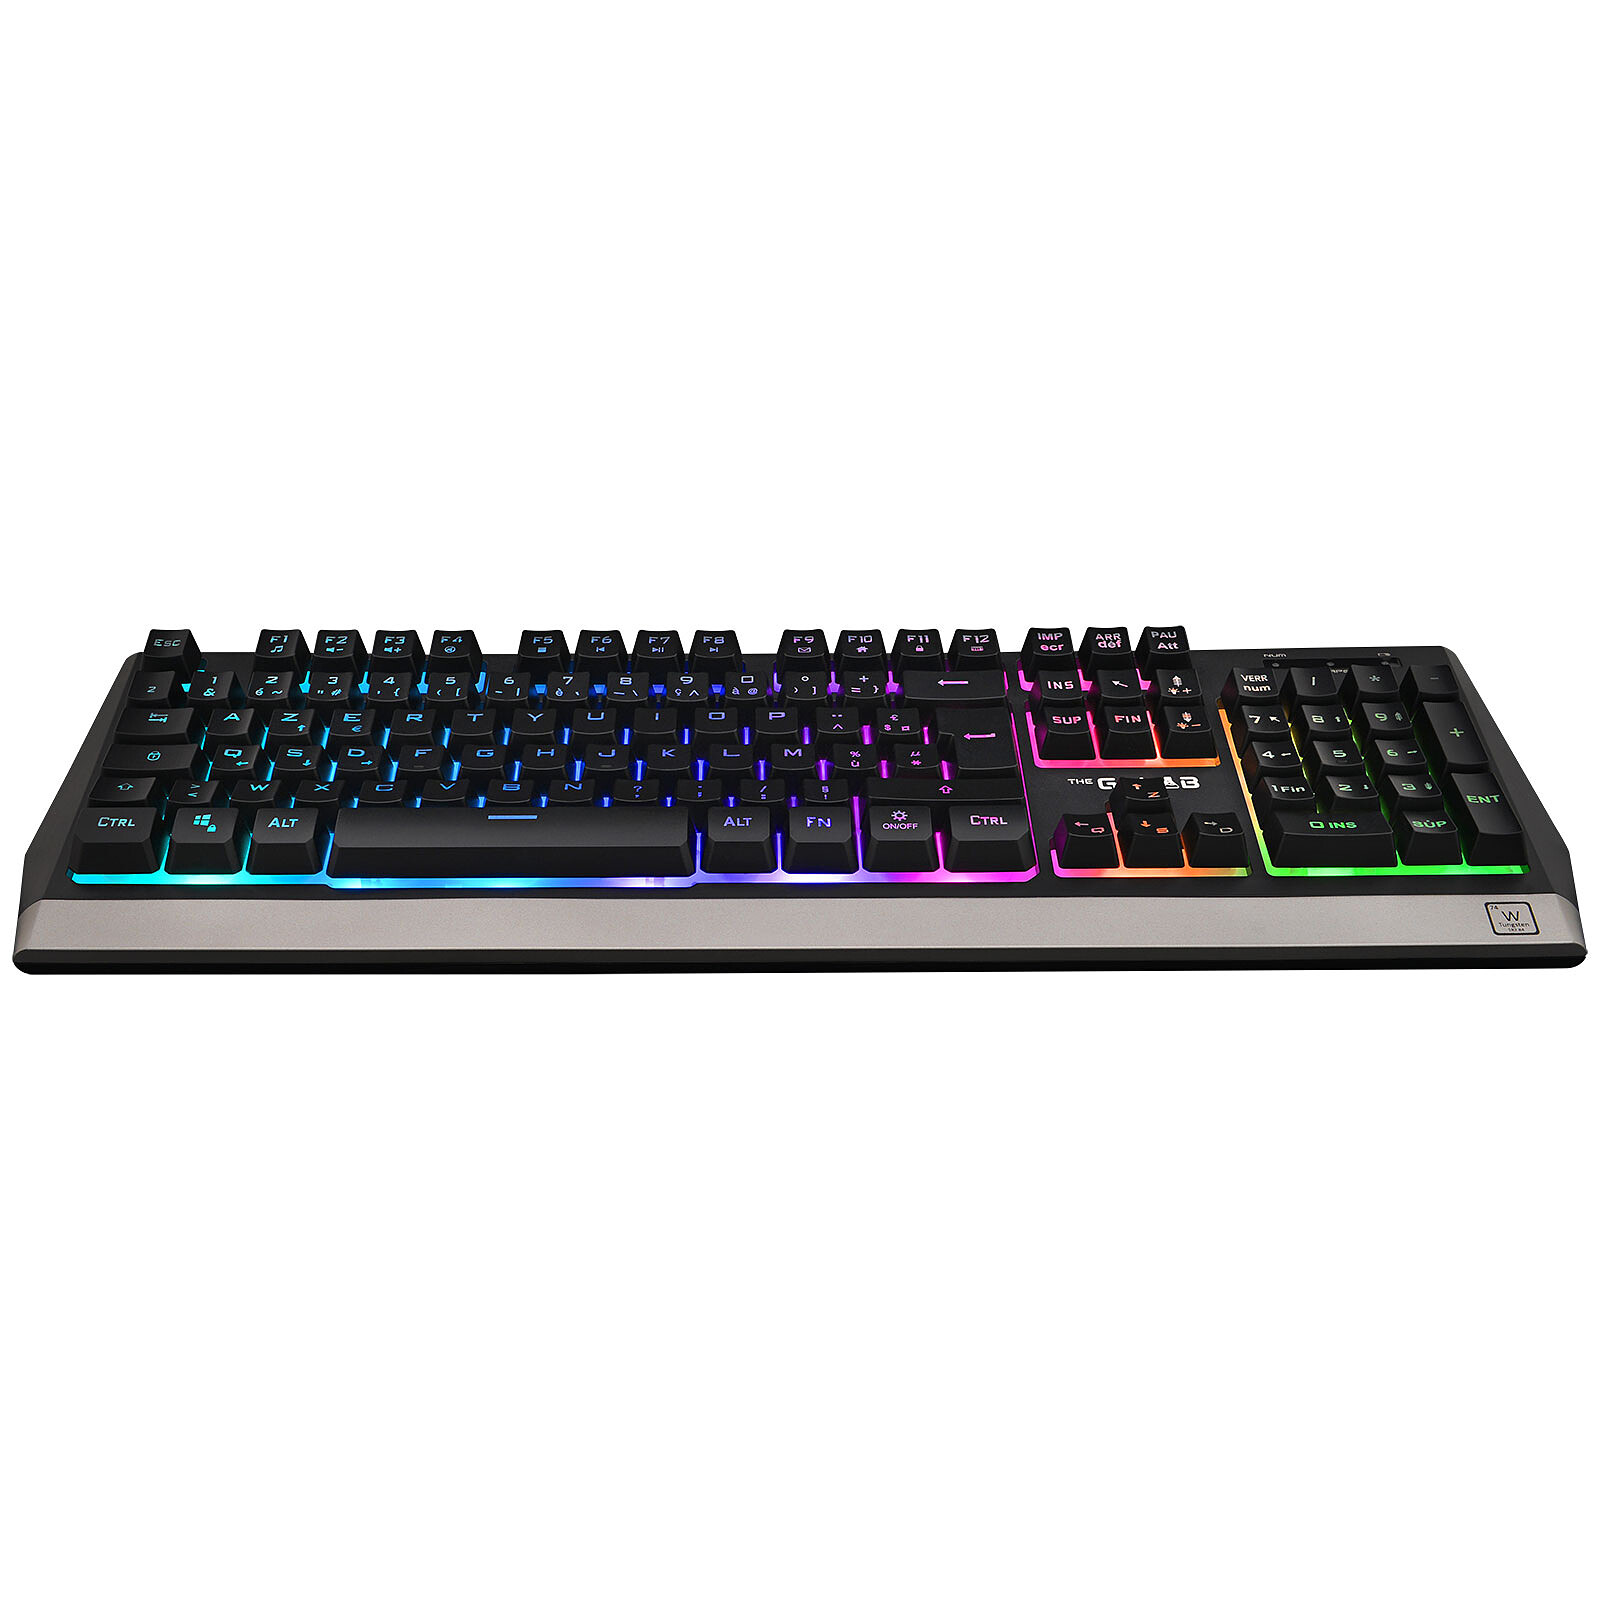 The G-Lab Combo Tungsten (IT) - Keyboard & mouse set - LDLC 3-year